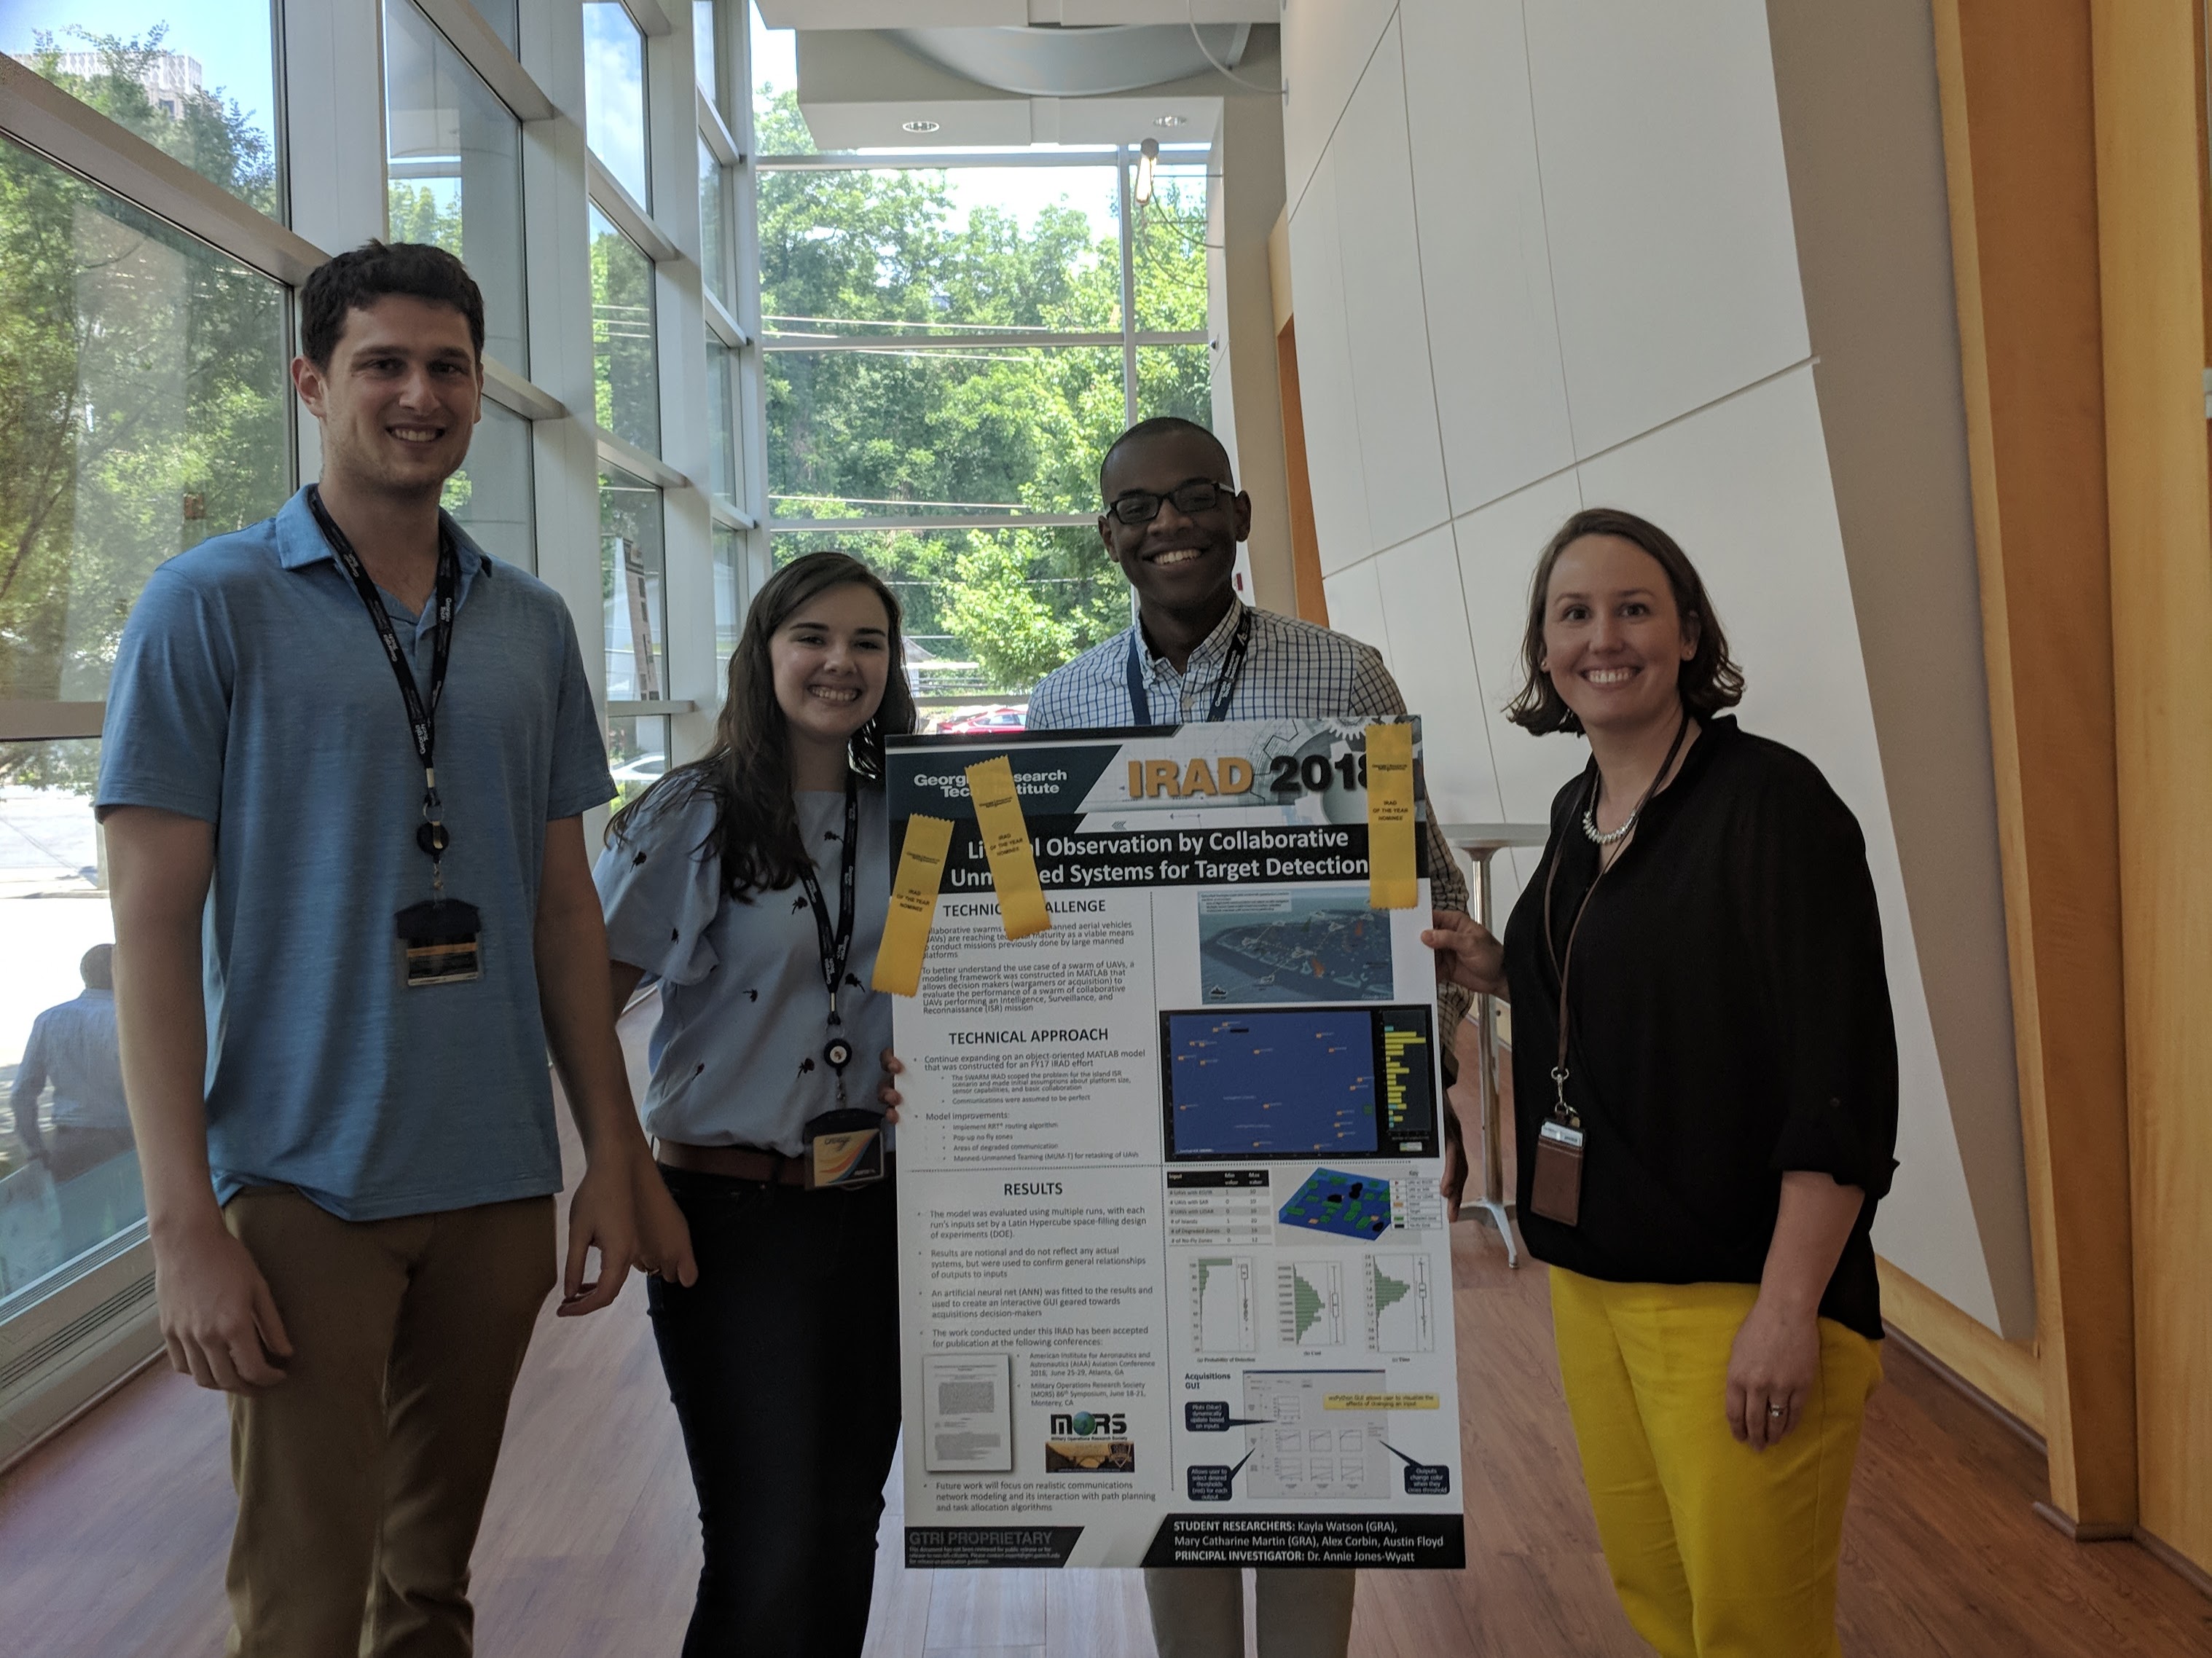 Mary Catharine Martin presents a project poster at a GTRI event, standing with her supervisor, Annie Jones-Wyatt (far right), former GTRI graduate research assistant Troy Sandler (far left), and former GTRI intern Austin Floyd (left of Jones-Wyatt).  Credit: Lynn Fountain